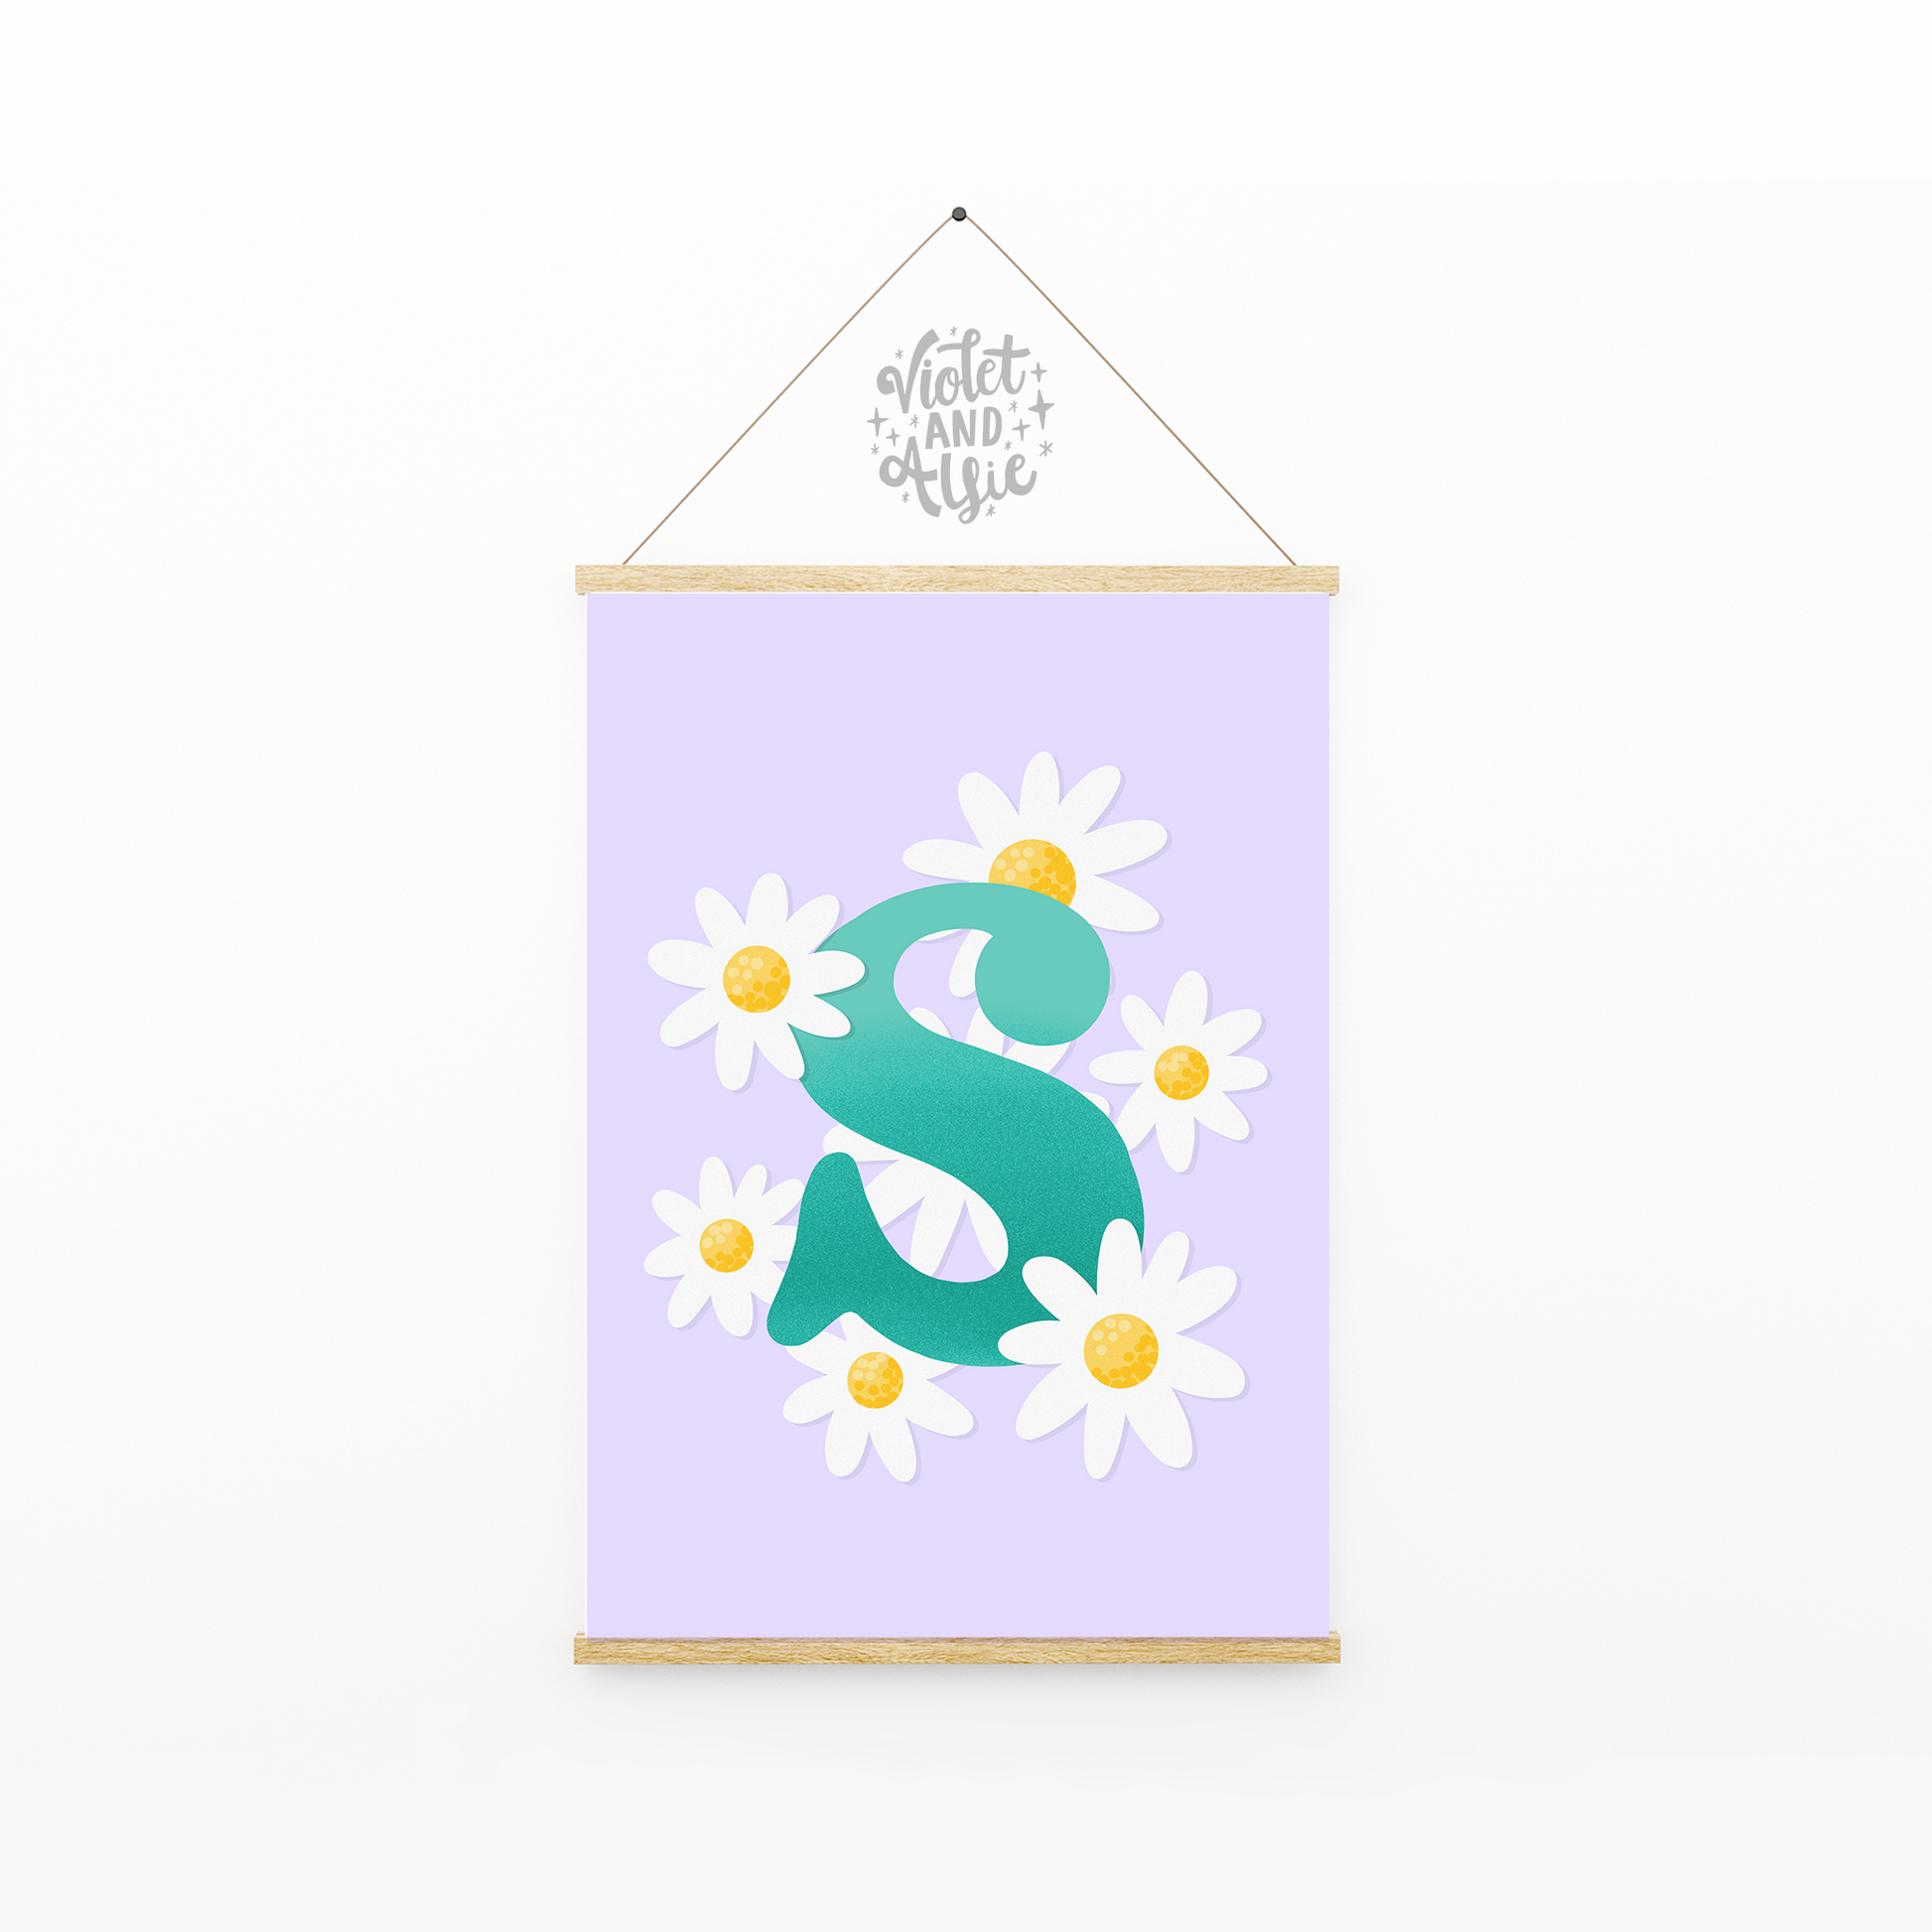 Daisy Letter Initial Print, Lilac and Turquoise Wall Art, Girl Gift, Flower print, personalised gift, new baby gift, girls room decor, retro daisy botanic print, biophilia gift, floral illustration